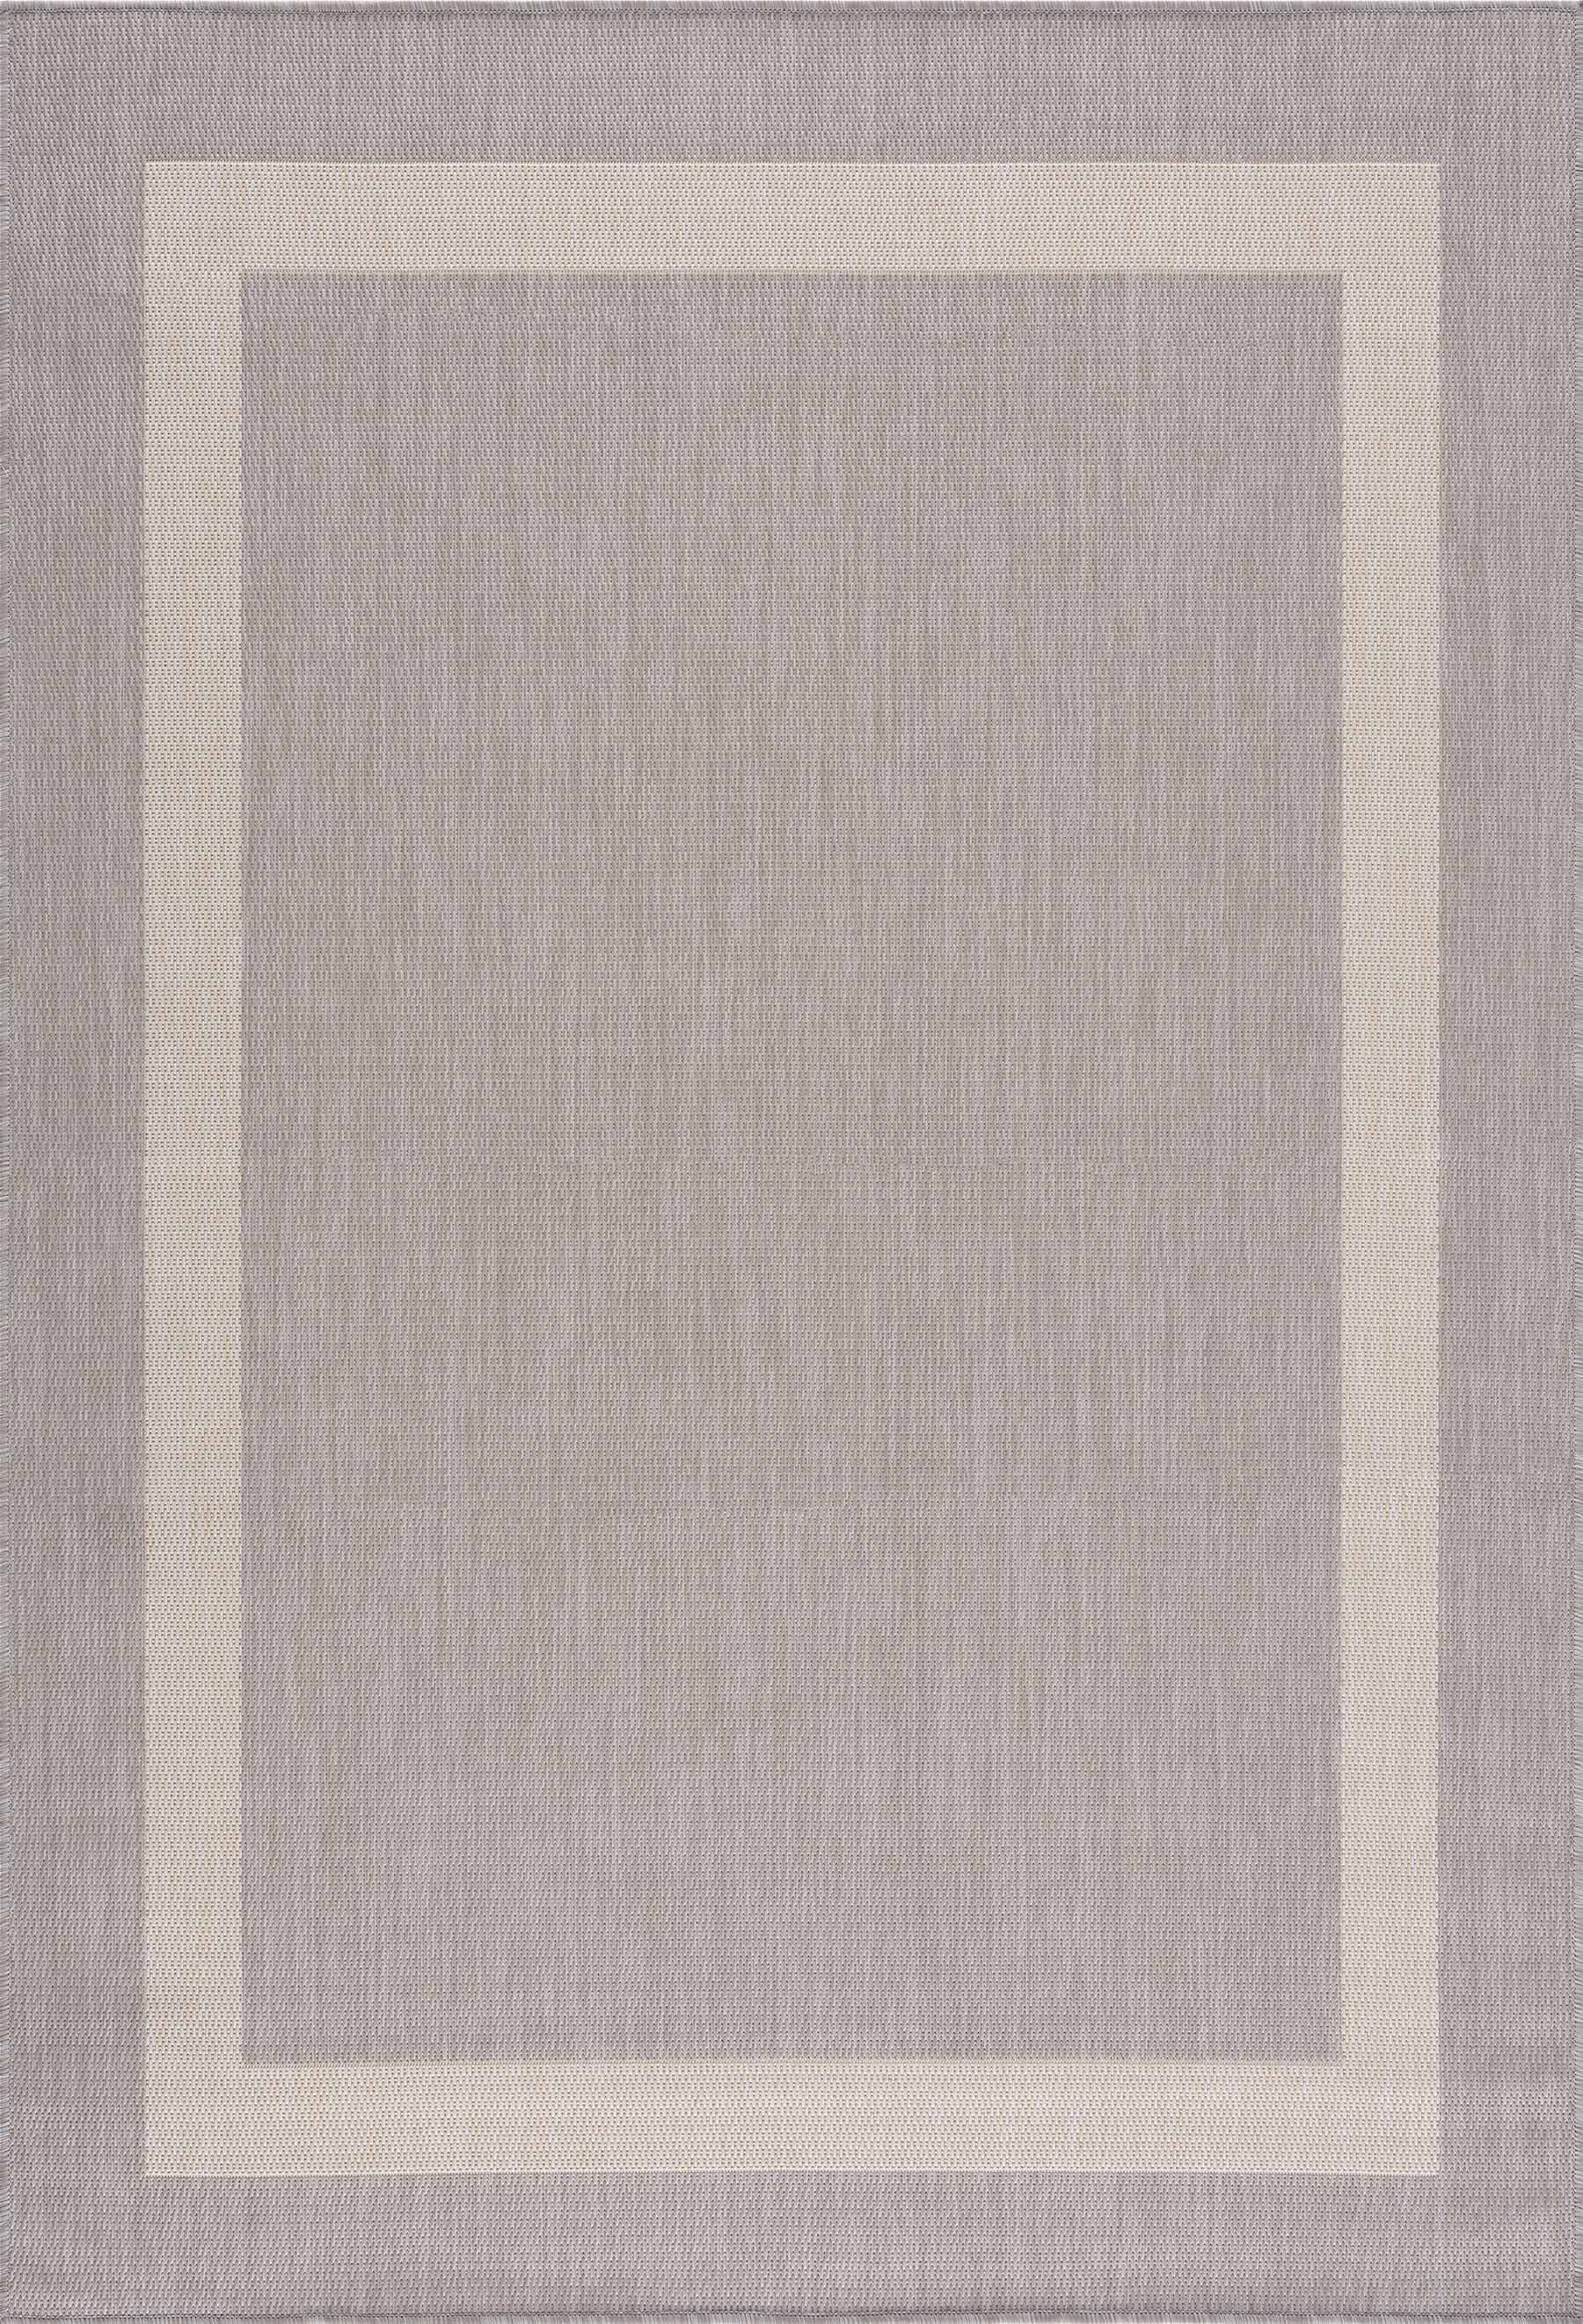 Bordered Outdoor Rugs Grey